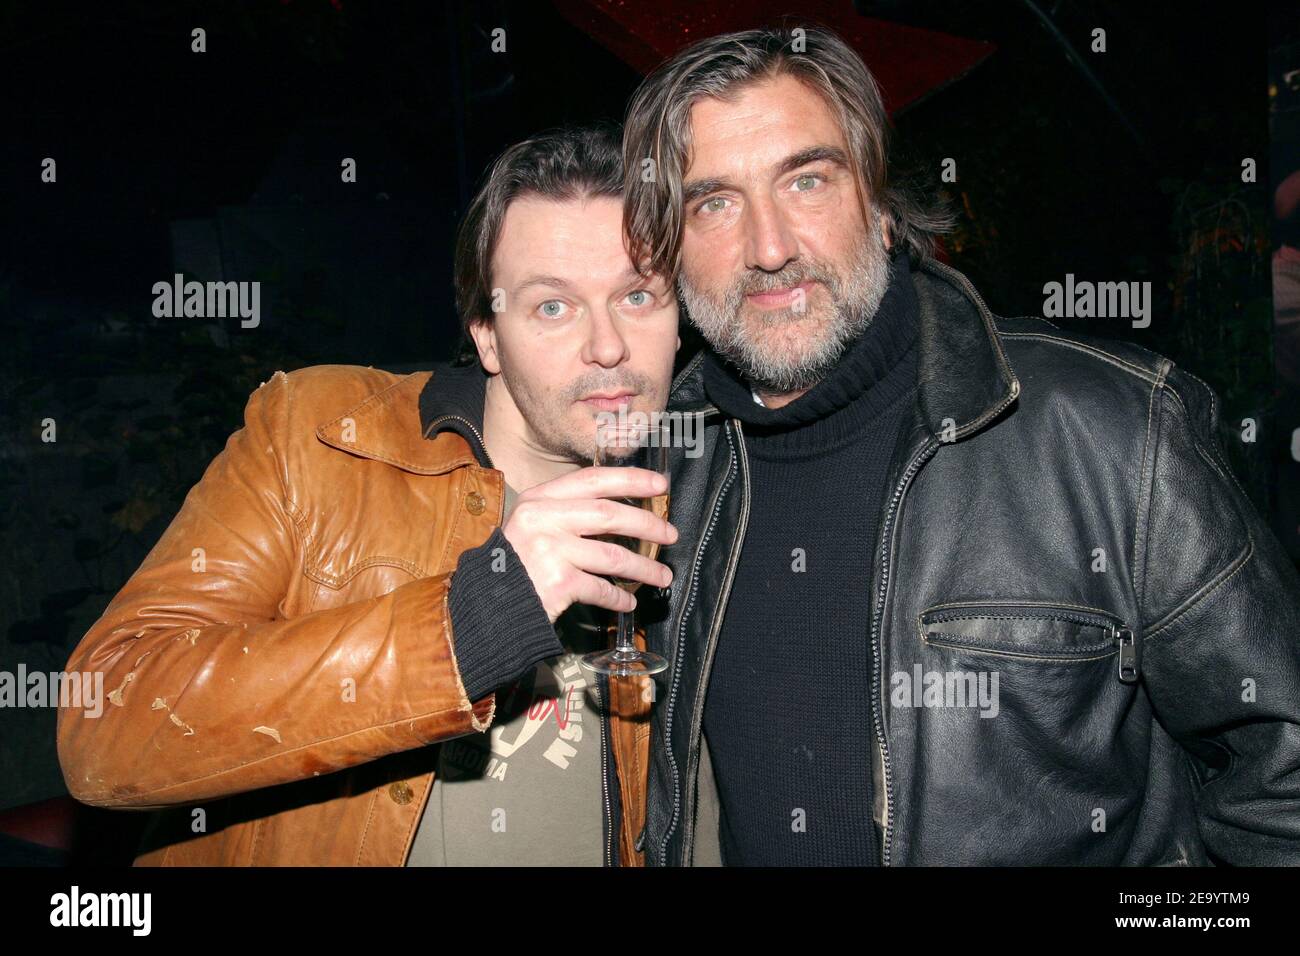 French actor and cast member Pierre-Ange Le Pogam (R) and French actor Olivier Mag at the after party for the premiere of Michel Muller's movie, 'La vie de Michel Muller est plus belle que la votre', at L'Etoile in Paris, France, on January 24, 2005. Photo by Benoit Pinguet/ABACA. Stock Photo